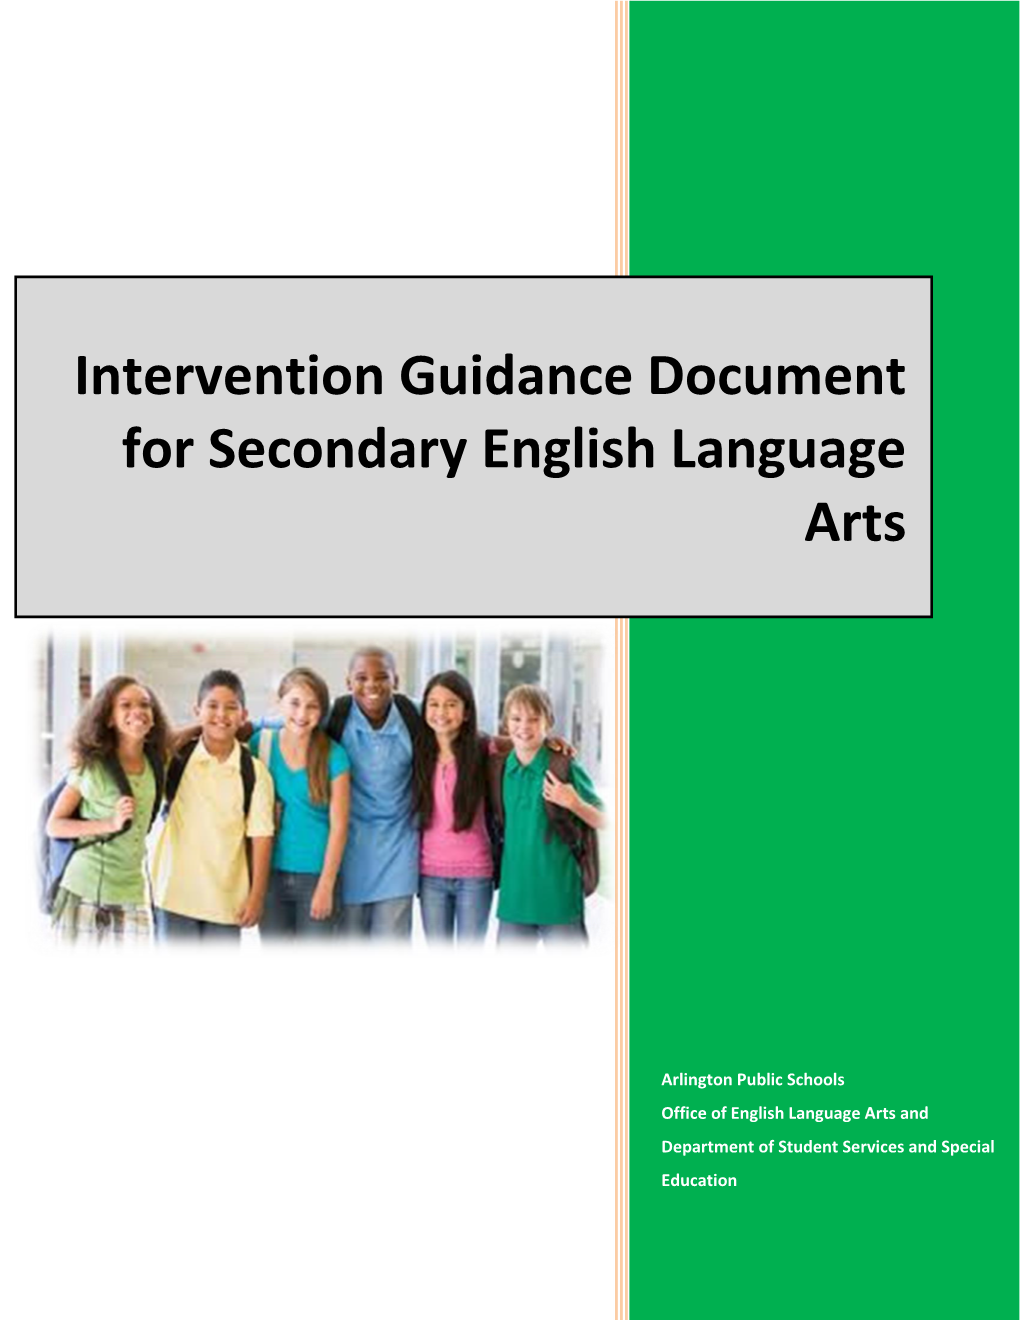 Intervention Guidance Document for Secondary English Language Arts